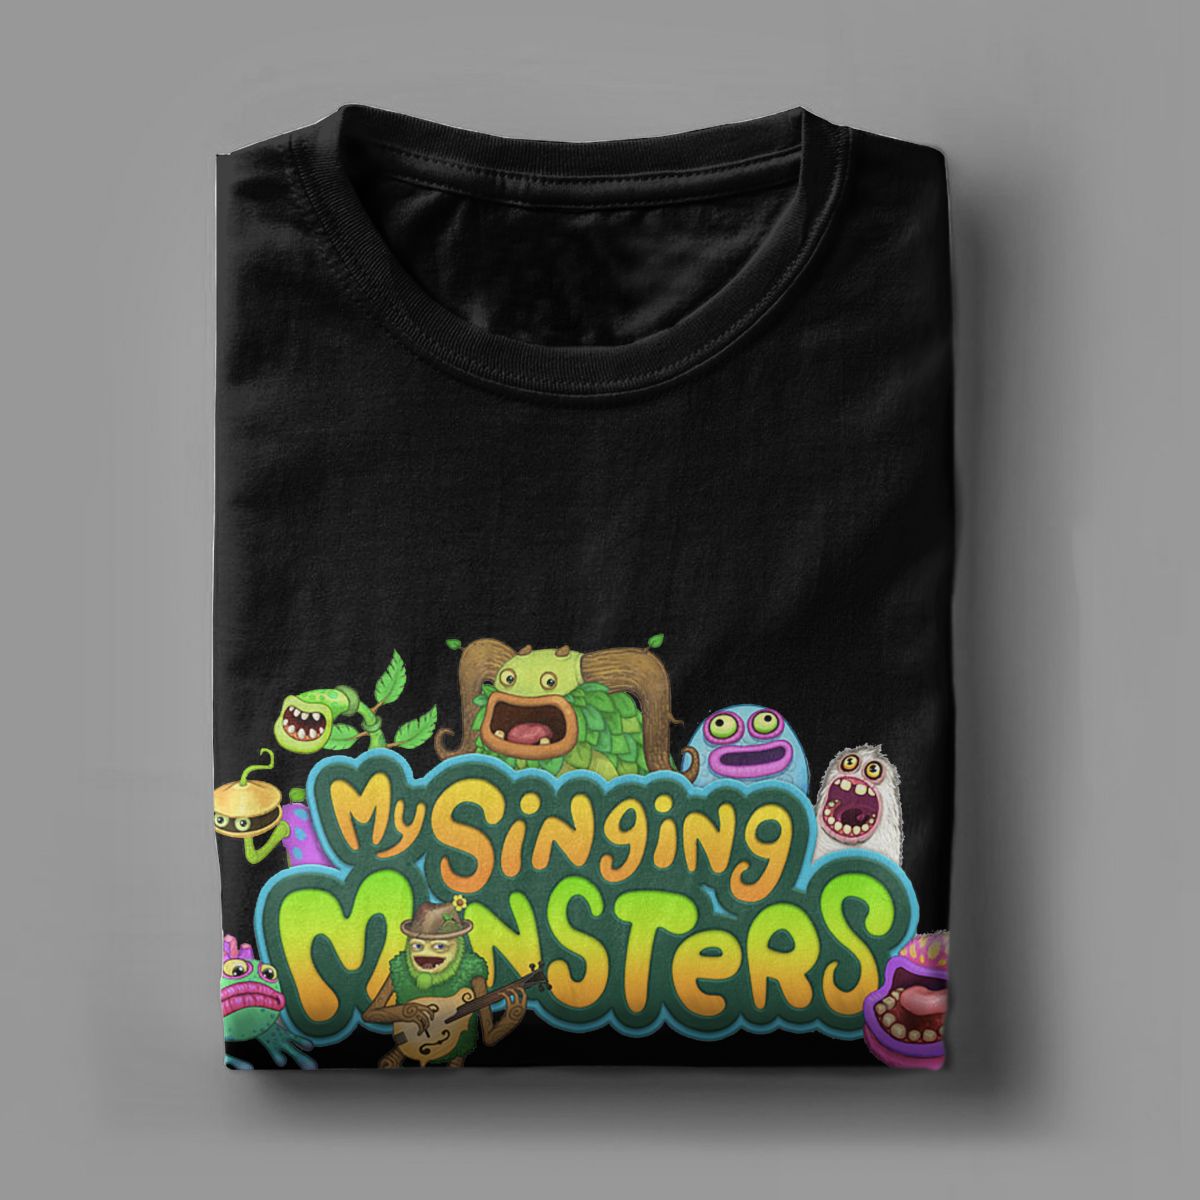 Casual My Singing Monsters Game Cartoon T Shirt for Men Women Pure Cotton T Shirts Short 4 - My Singing Monsters Plush